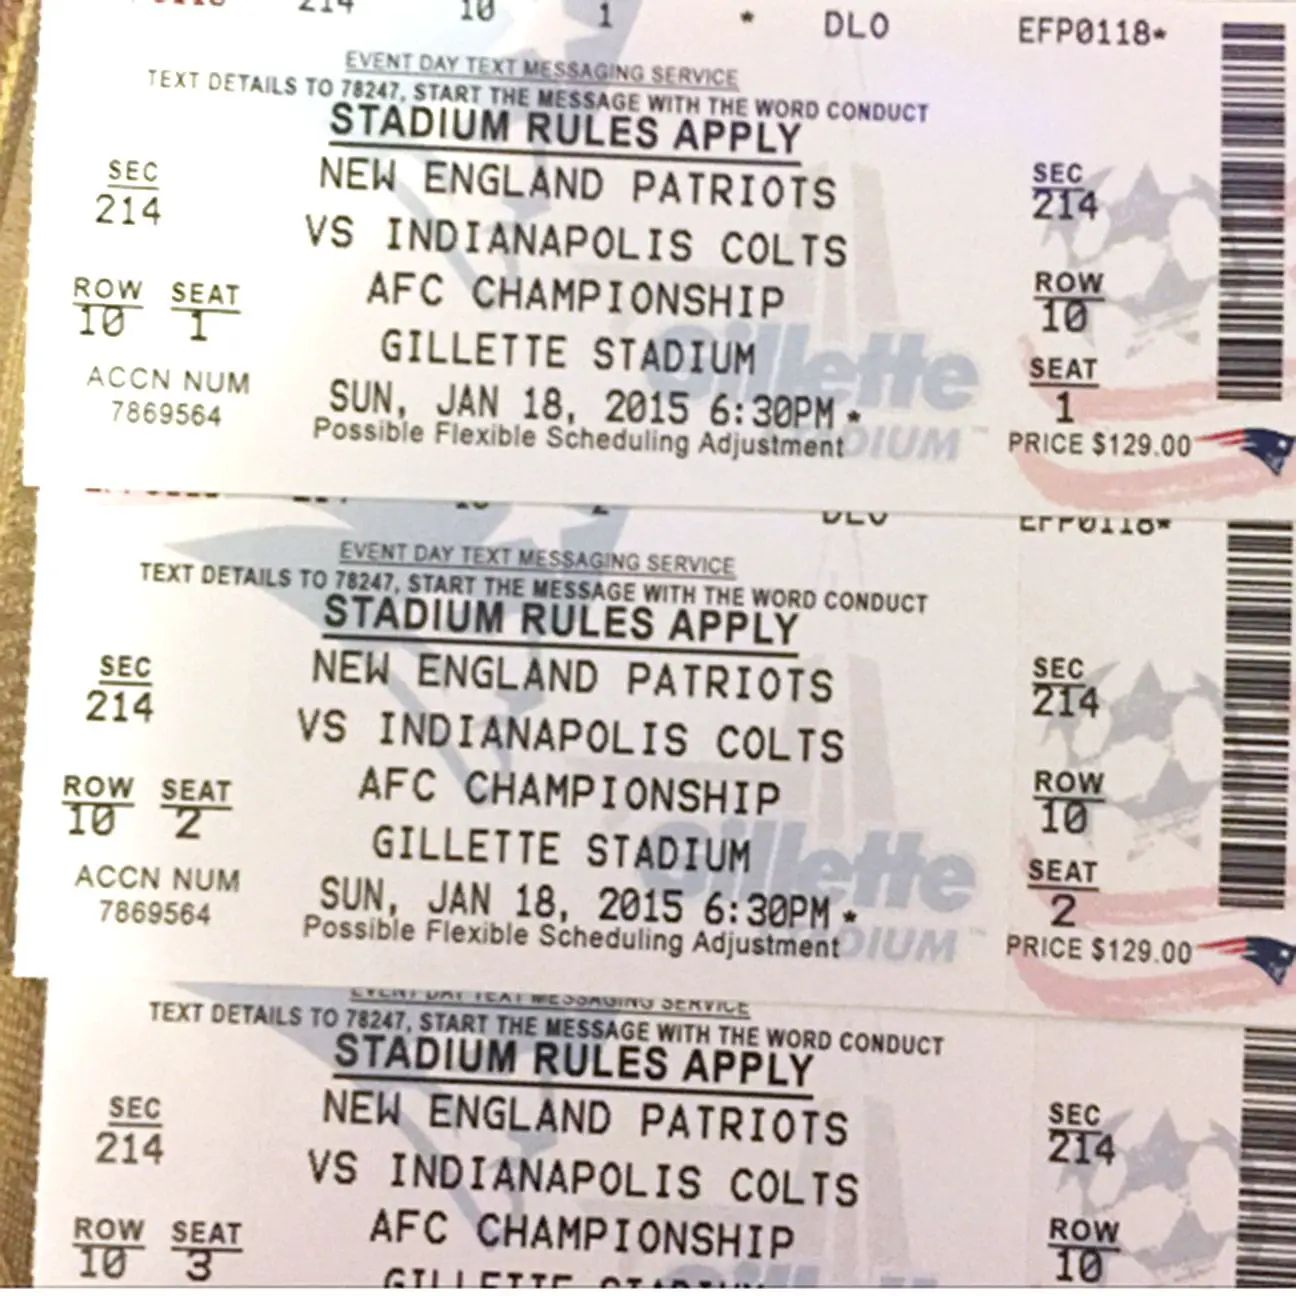 New England Patriots warn fans about counterfeit tickets